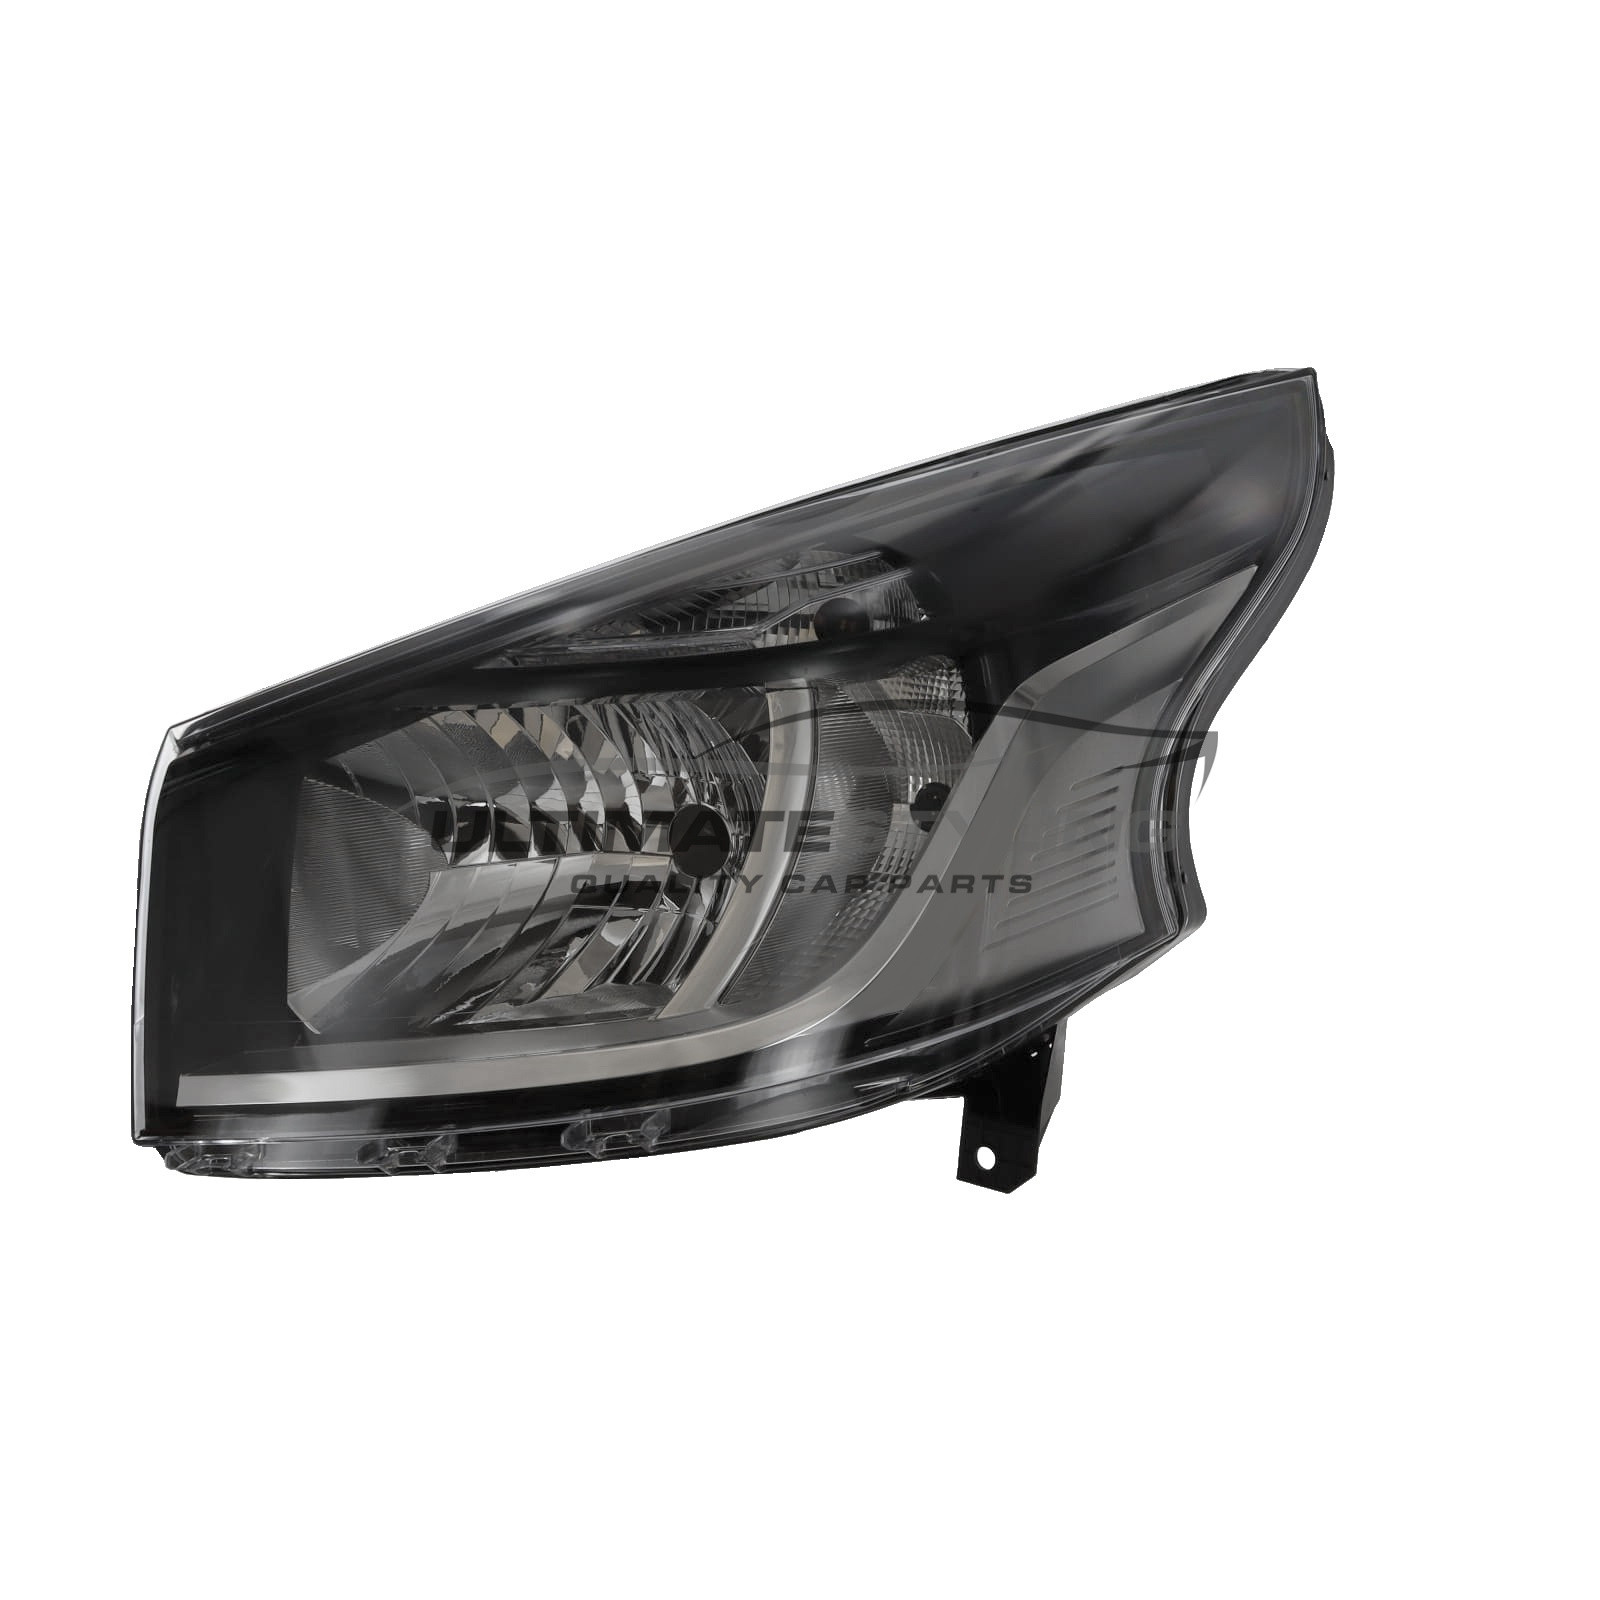 Fiat Talento 2016->, Nissan NV300 2014->, Renault Trafic 2014-> Halogen, Electric Without Motor, Chrome Headlight / Headlamp with Black Surround Passengers Side (LH)